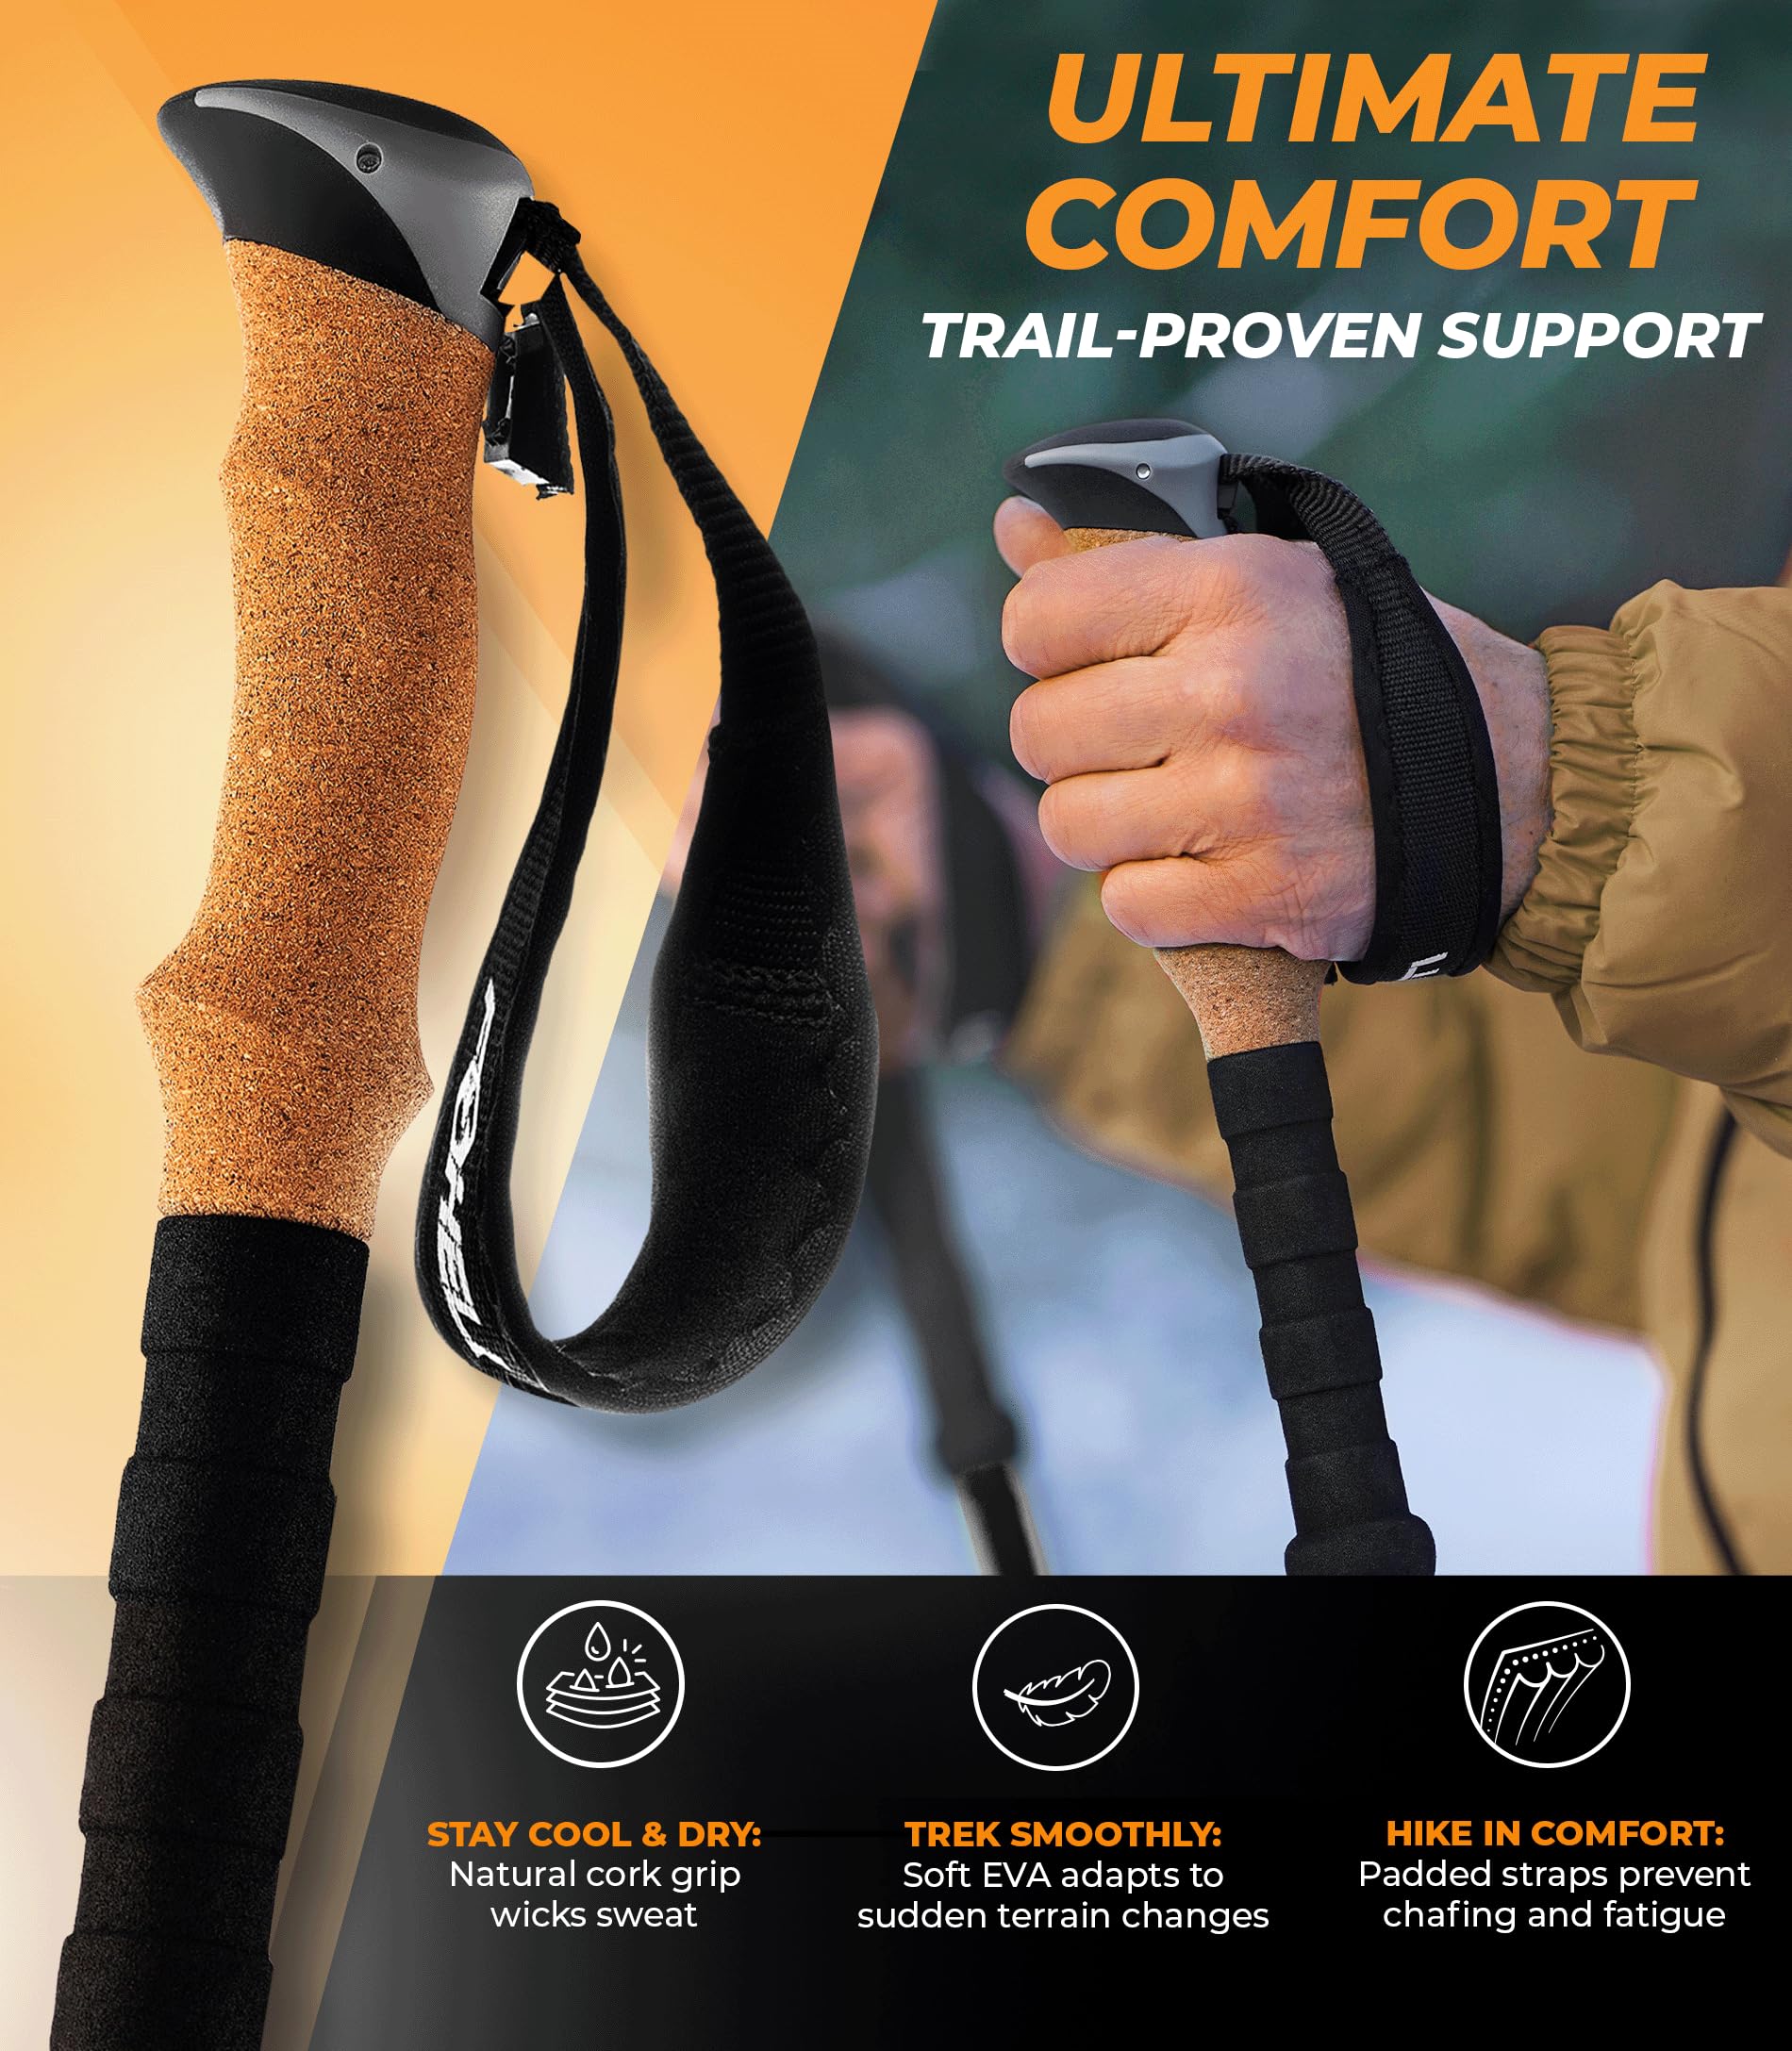 Foxelli Hiking Poles – Lightweight & Collapsible with Comfortable Cork Grips, Easily Adjustable for All Heights, Includes Carry Bag and Accessories